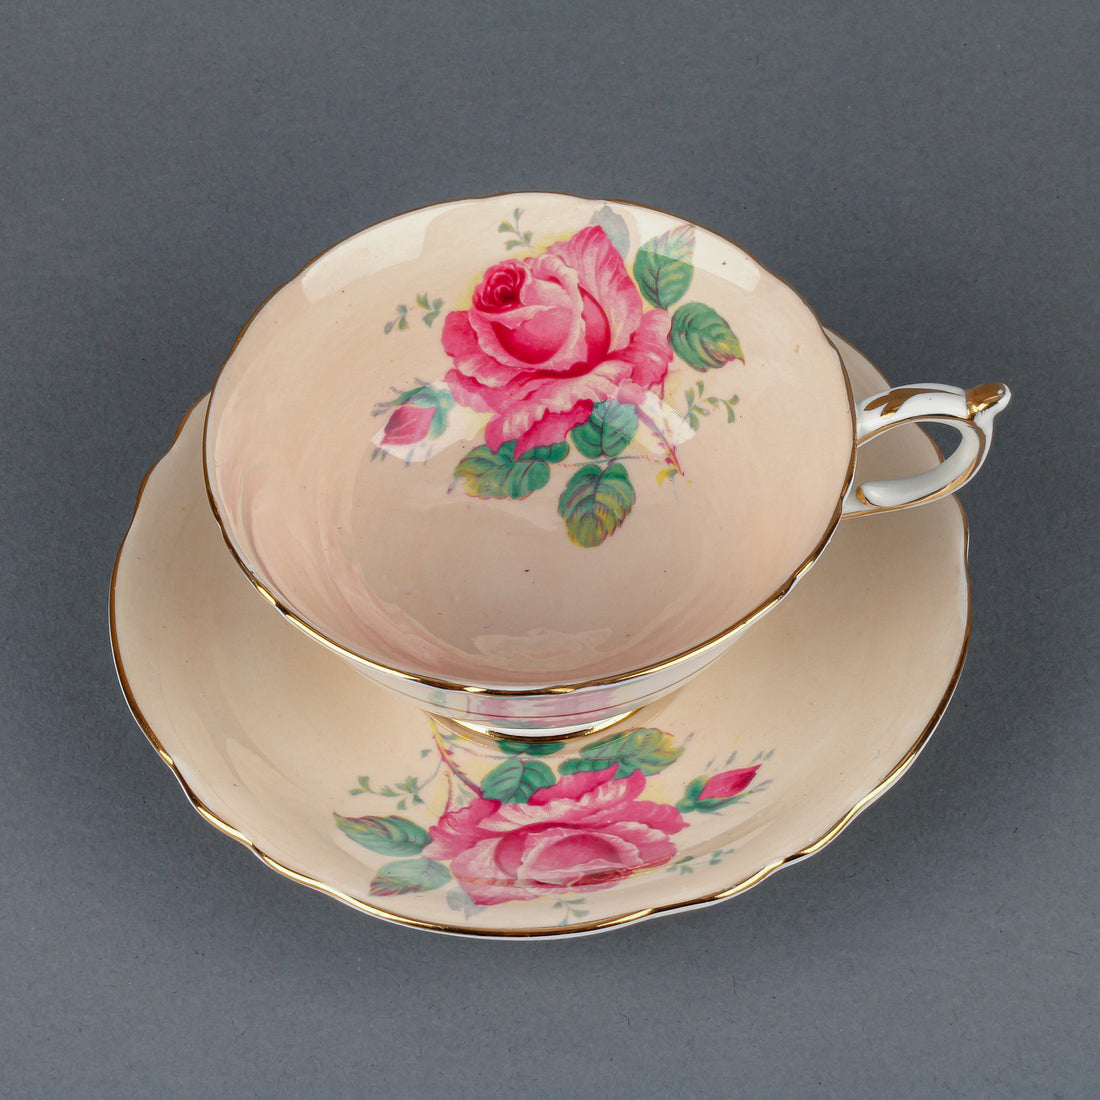 PARAGON A7815 Hand-Painted Rose Cup & Saucer